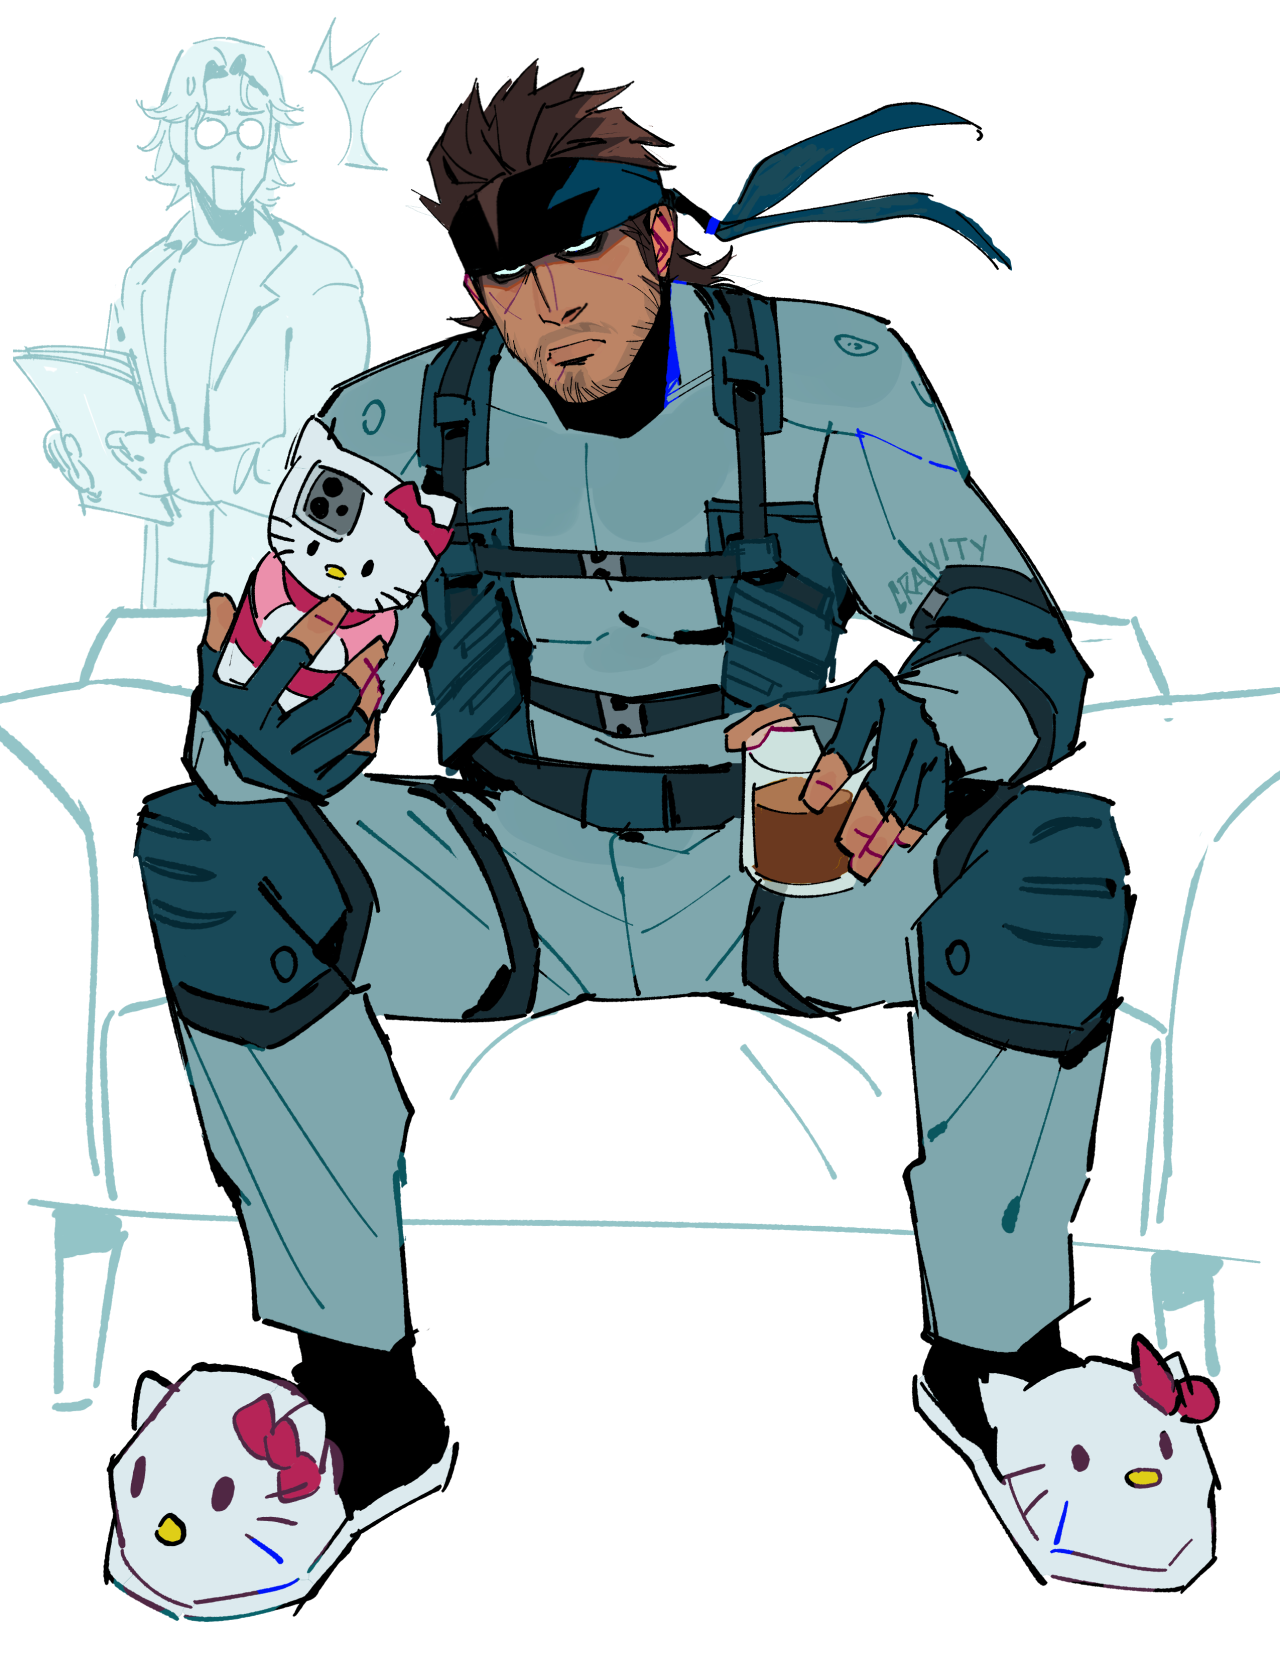 Drawing of Solid Snake from Metal Gear Solid. He is sat on a couch and looks to be taking a selfie with a phone that has a Hello Kitty phone case. His expression is deathly serious, eyes glowering under his bandana and his mouth set to a scowl. Both arms are propped up against his thighs, the hand not holding up the phone instead holding up a old-fashioned glass of alcohol. He's wearing Hello Kitty slippers. In the background Otacon looks at him with surprise and incredulity.